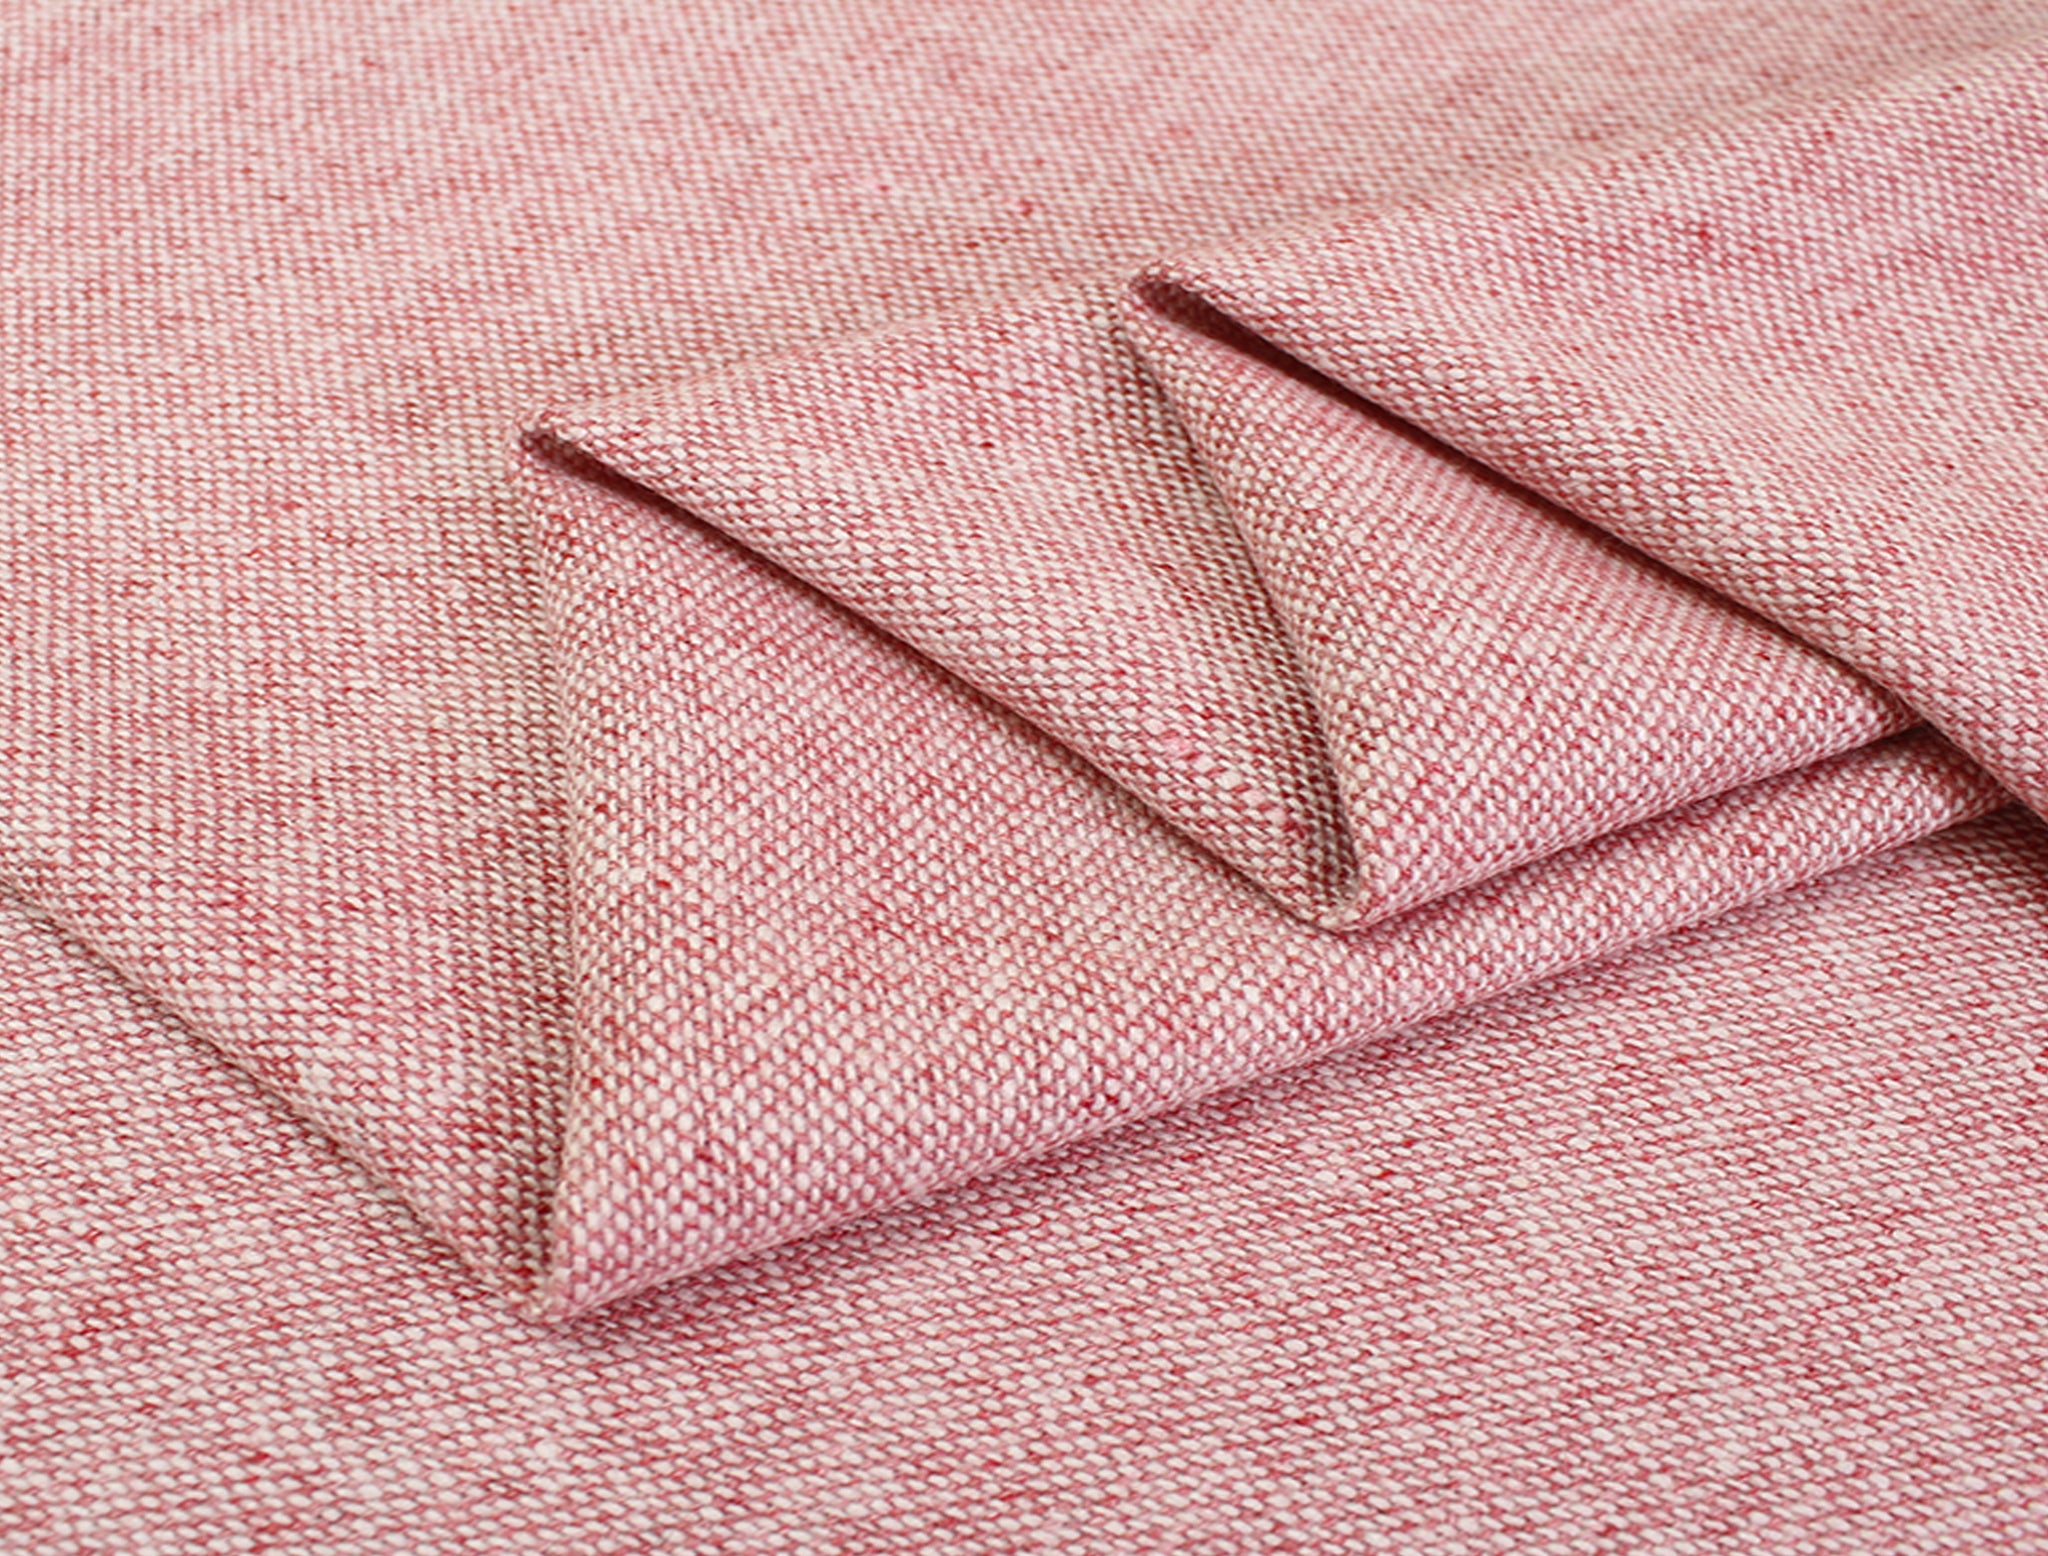 Shades of Pink/White - Wool/ French Tweed - 148 cm Wide.